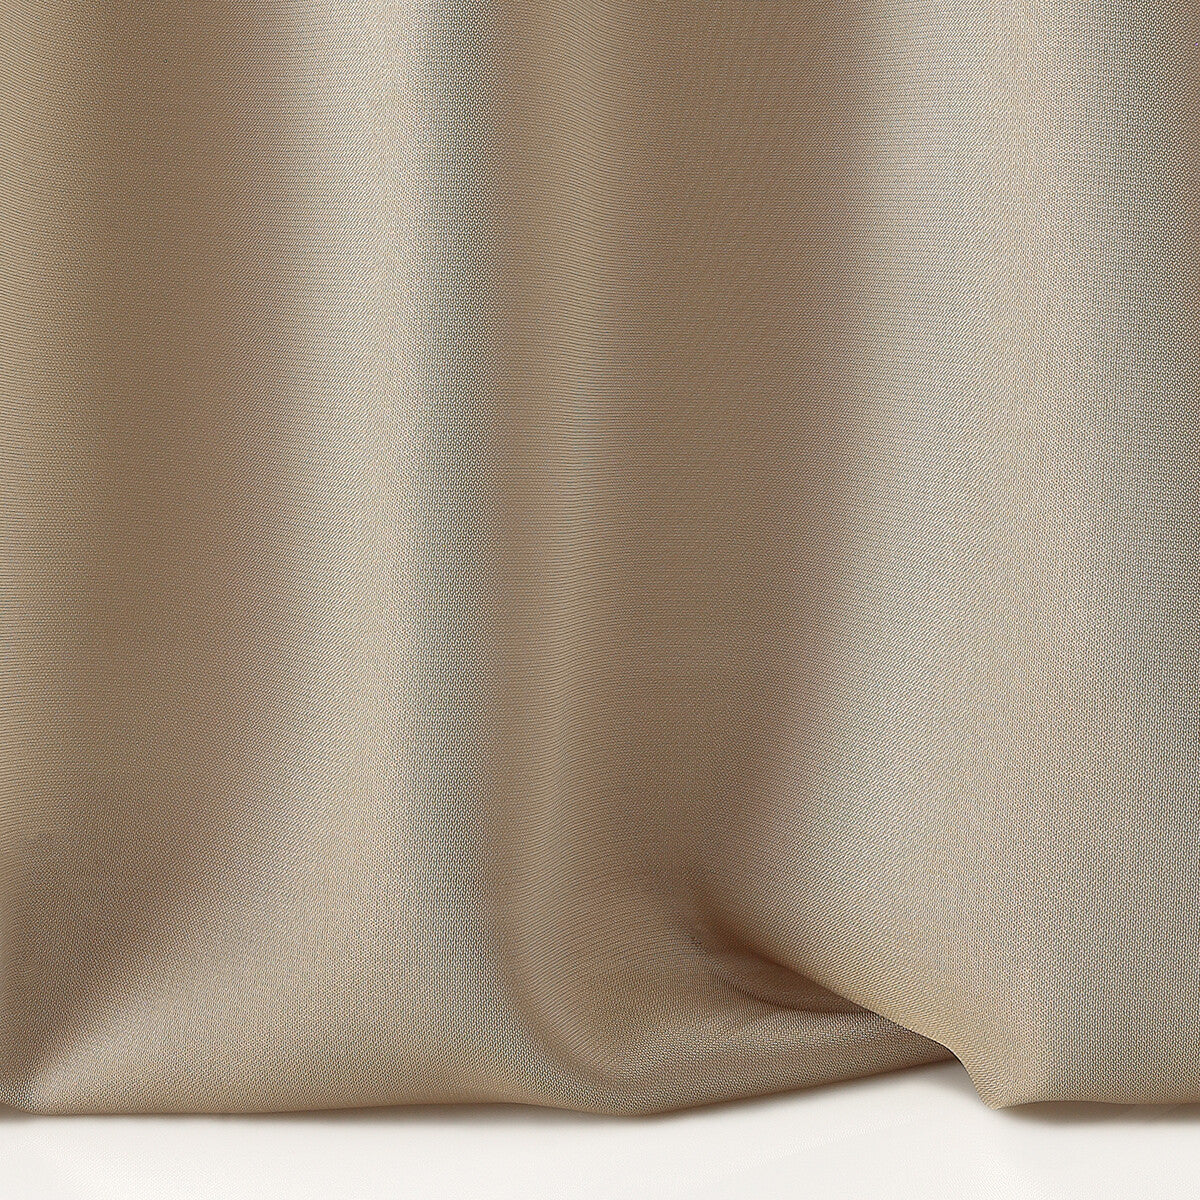 Sonnet fabric in 1 color - pattern LZ-30134.01.0 - by Kravet Design in the Lizzo collection